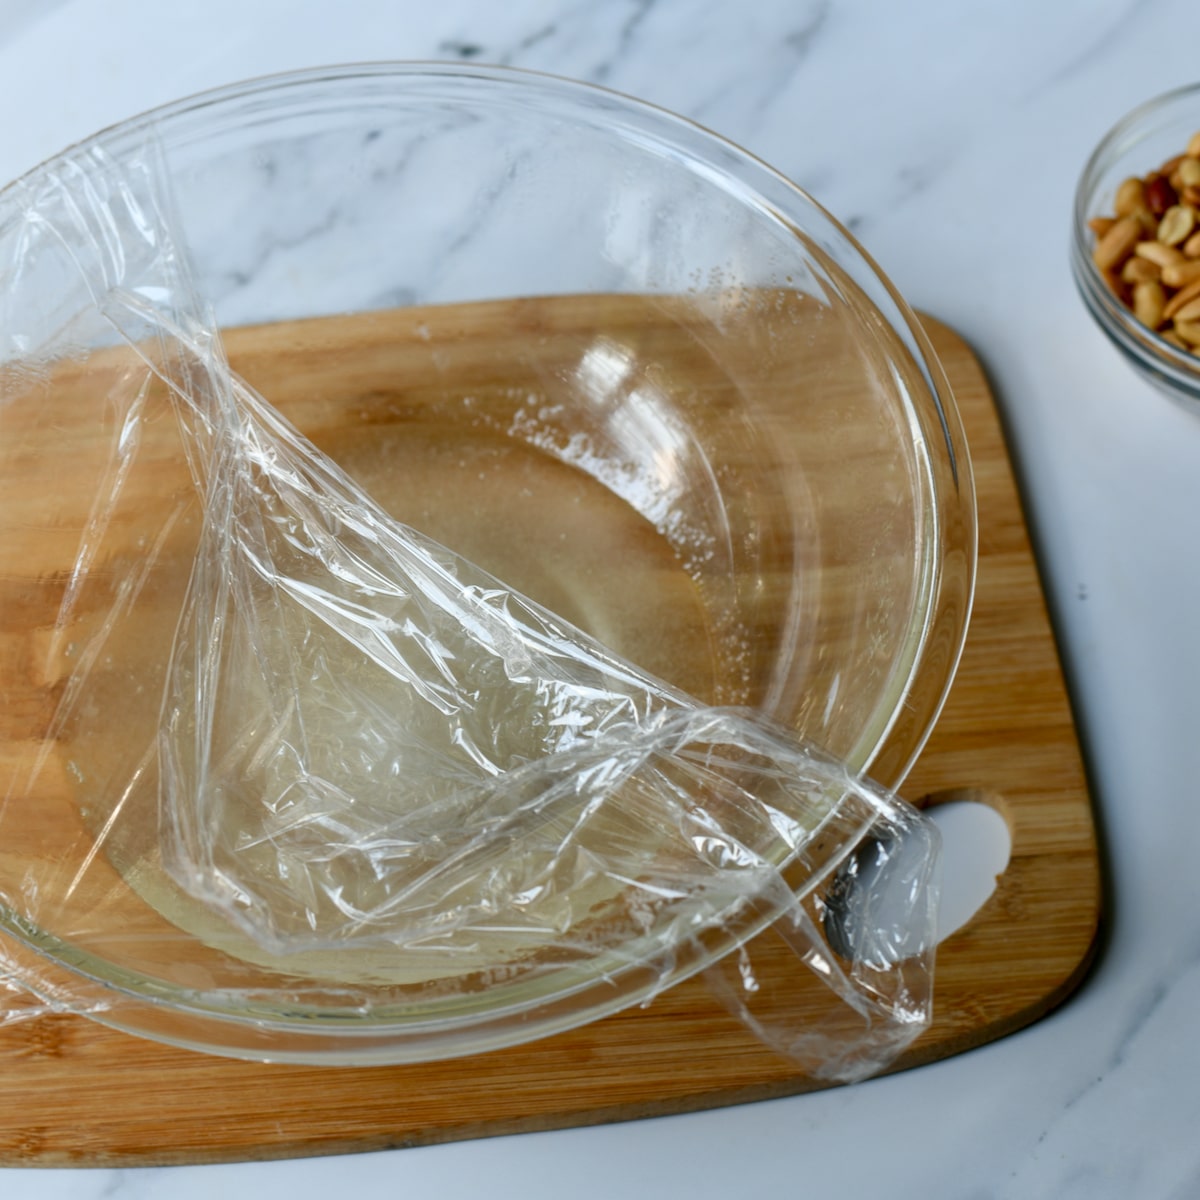 Plastic wrap halfway covering a glass bowl on top of a wooden cutting board.